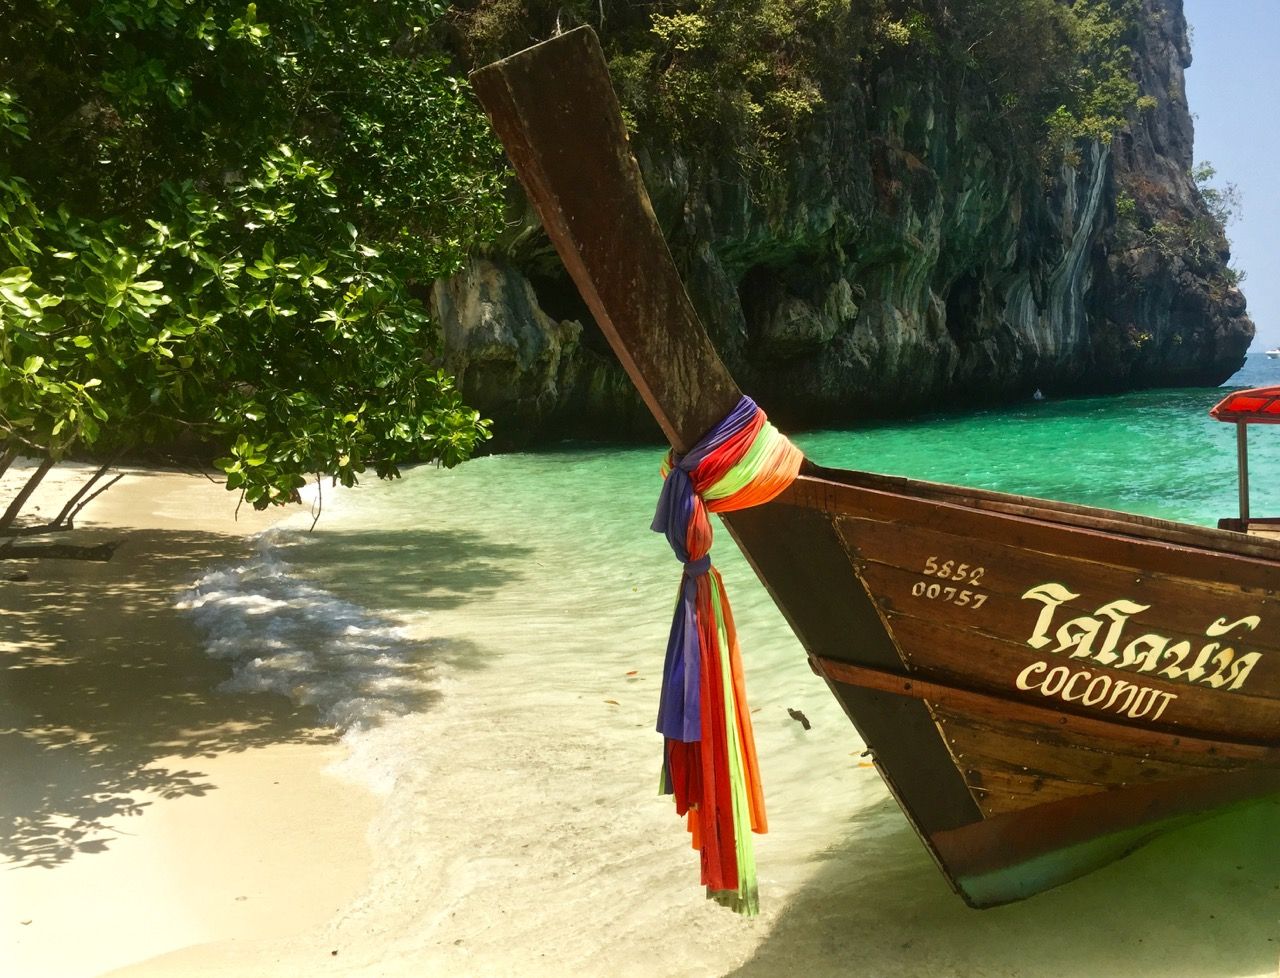 Thai boat named "Coconut" anchored at a beach cove.